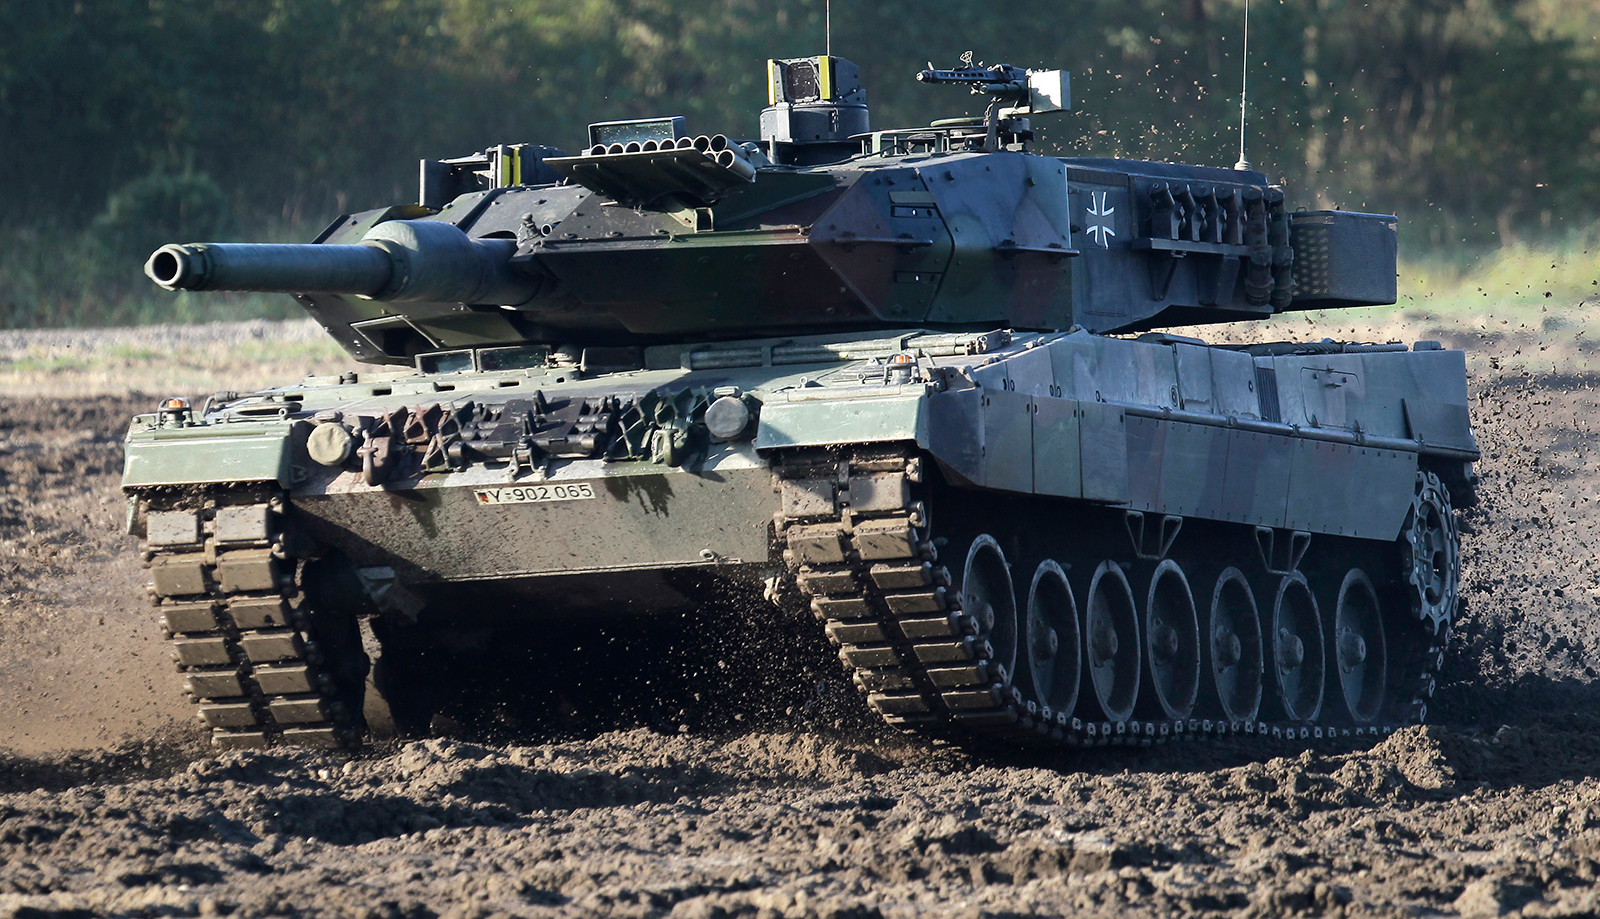 A Leopard 2 tank is seen during a demonstration event in Munster near Hannover, Germany, on September 28, 2011. 